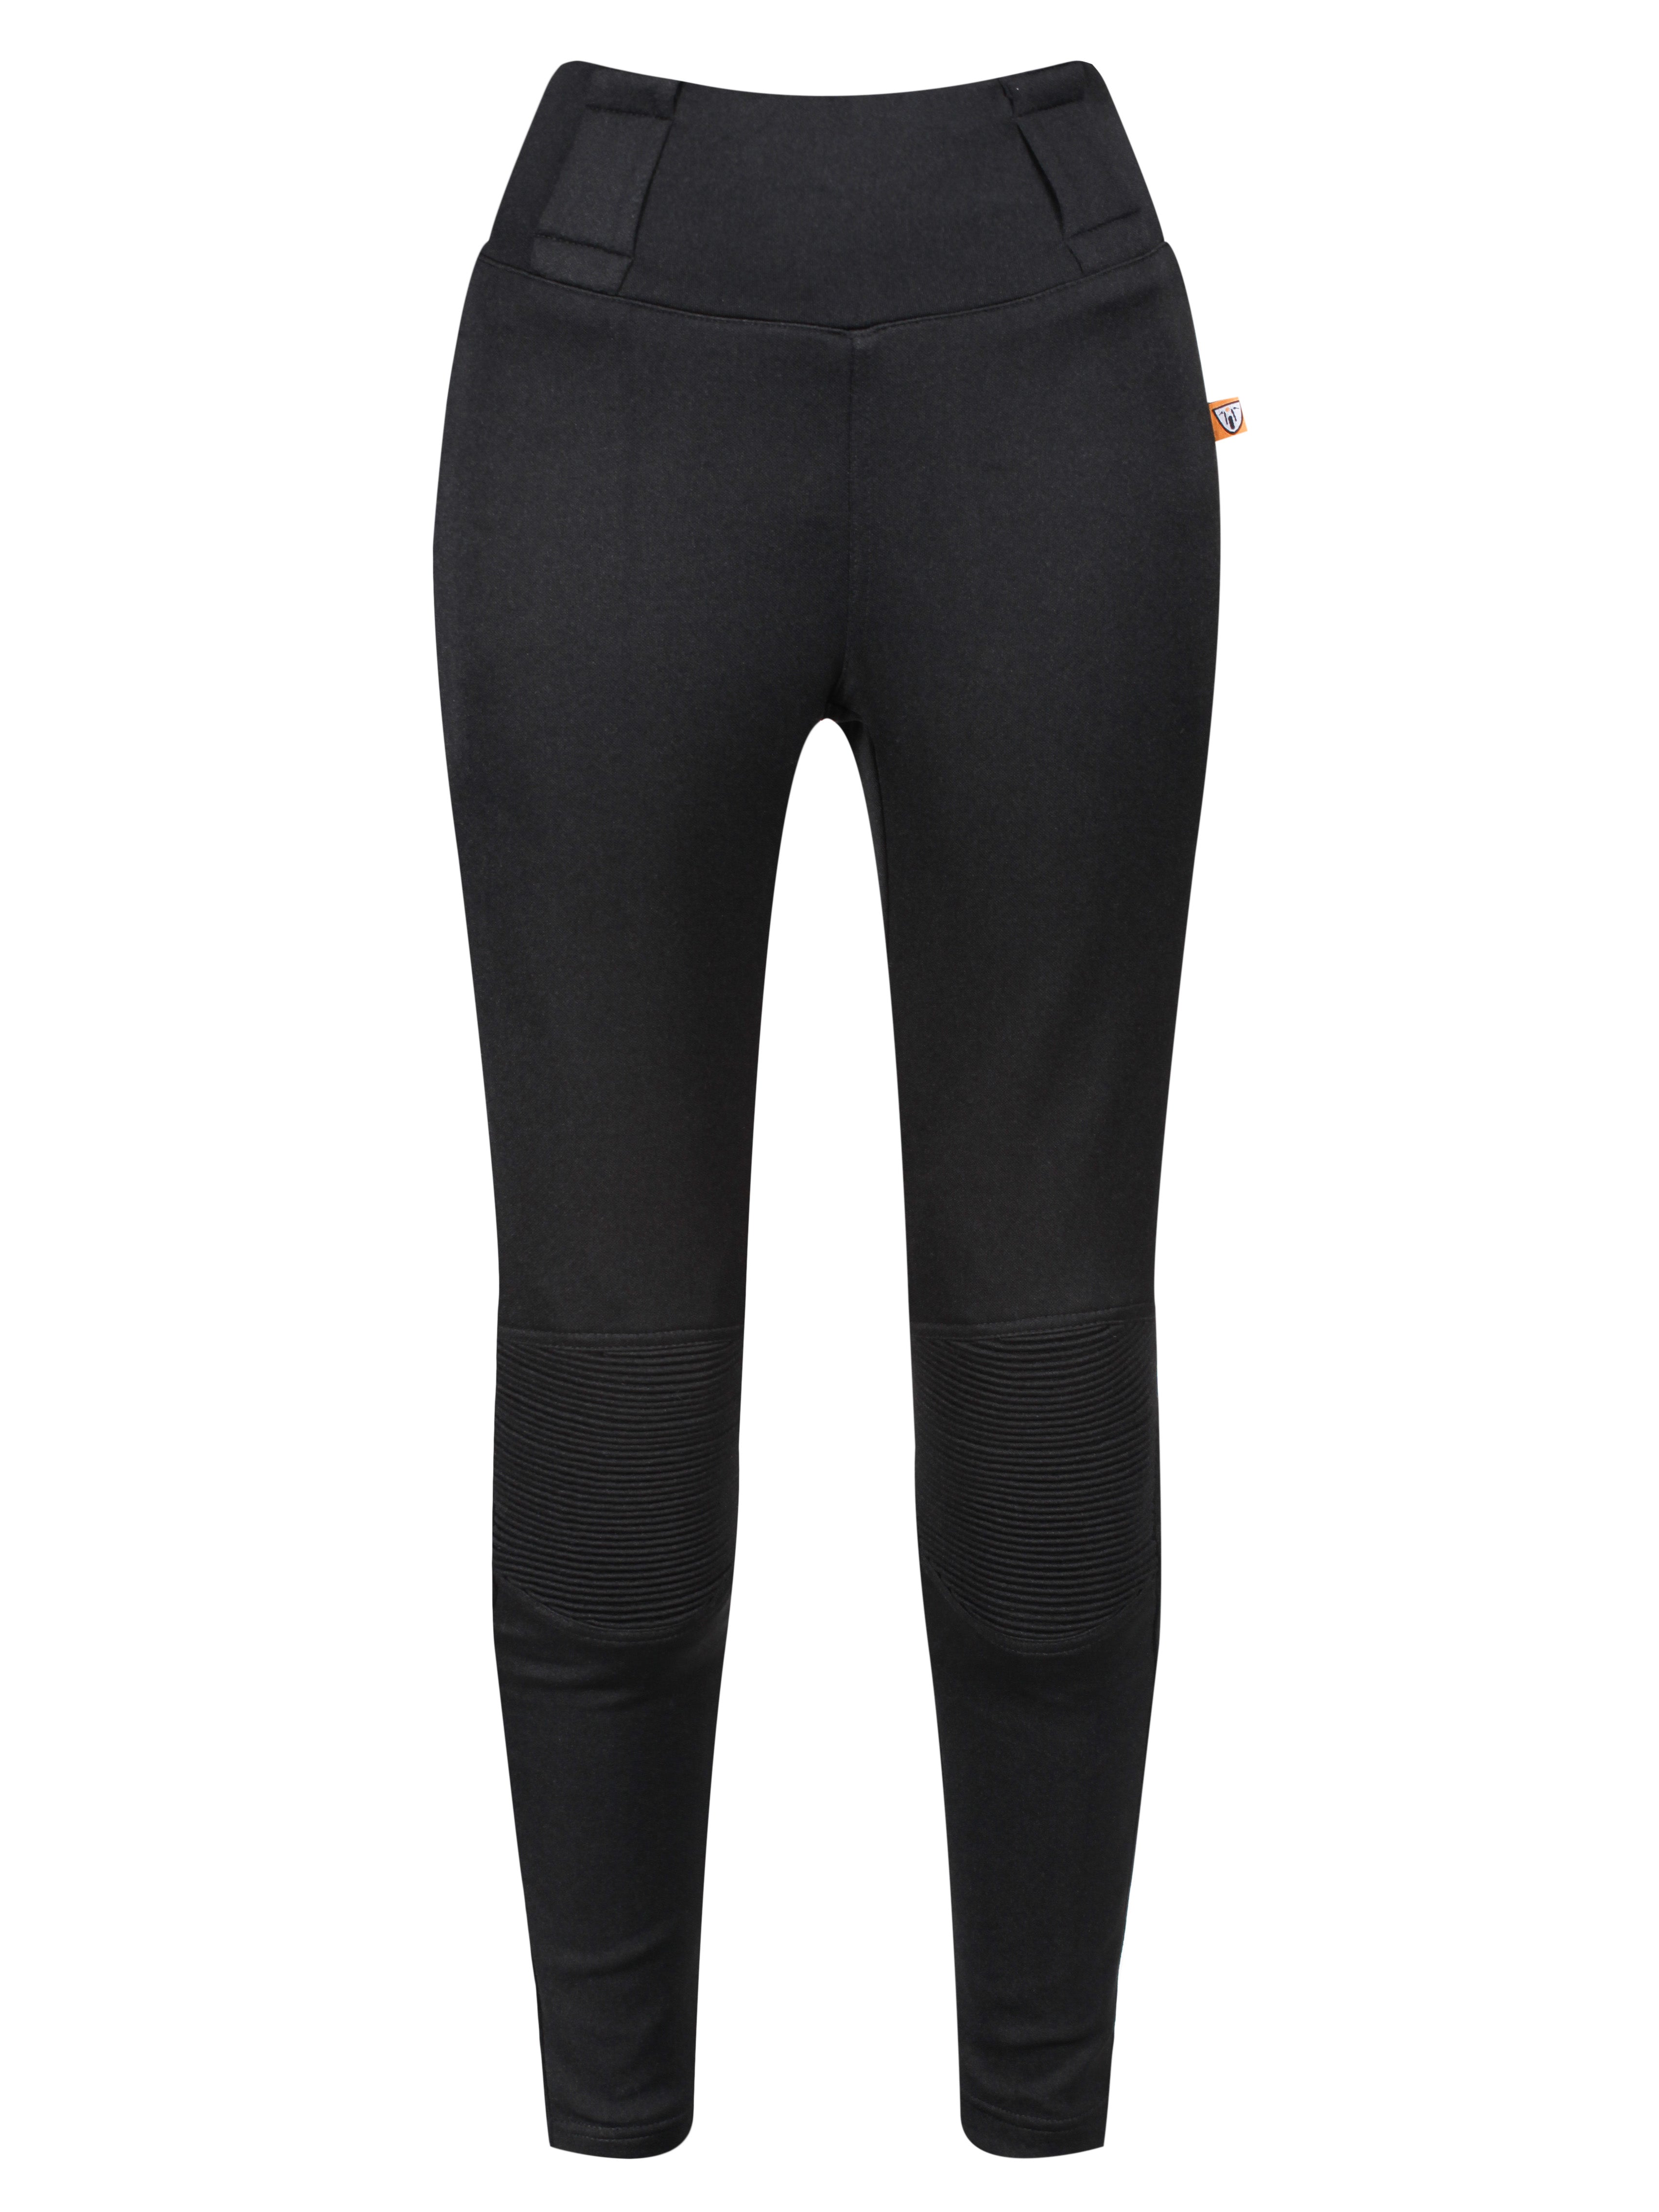 MotoGirl - Moto Leggings made with 100% Dupont Kevlar Fiber. CE Level 2  Approved knee armour included and hip protectors also available. - Plain or ribbed  knee - UK Size 4 